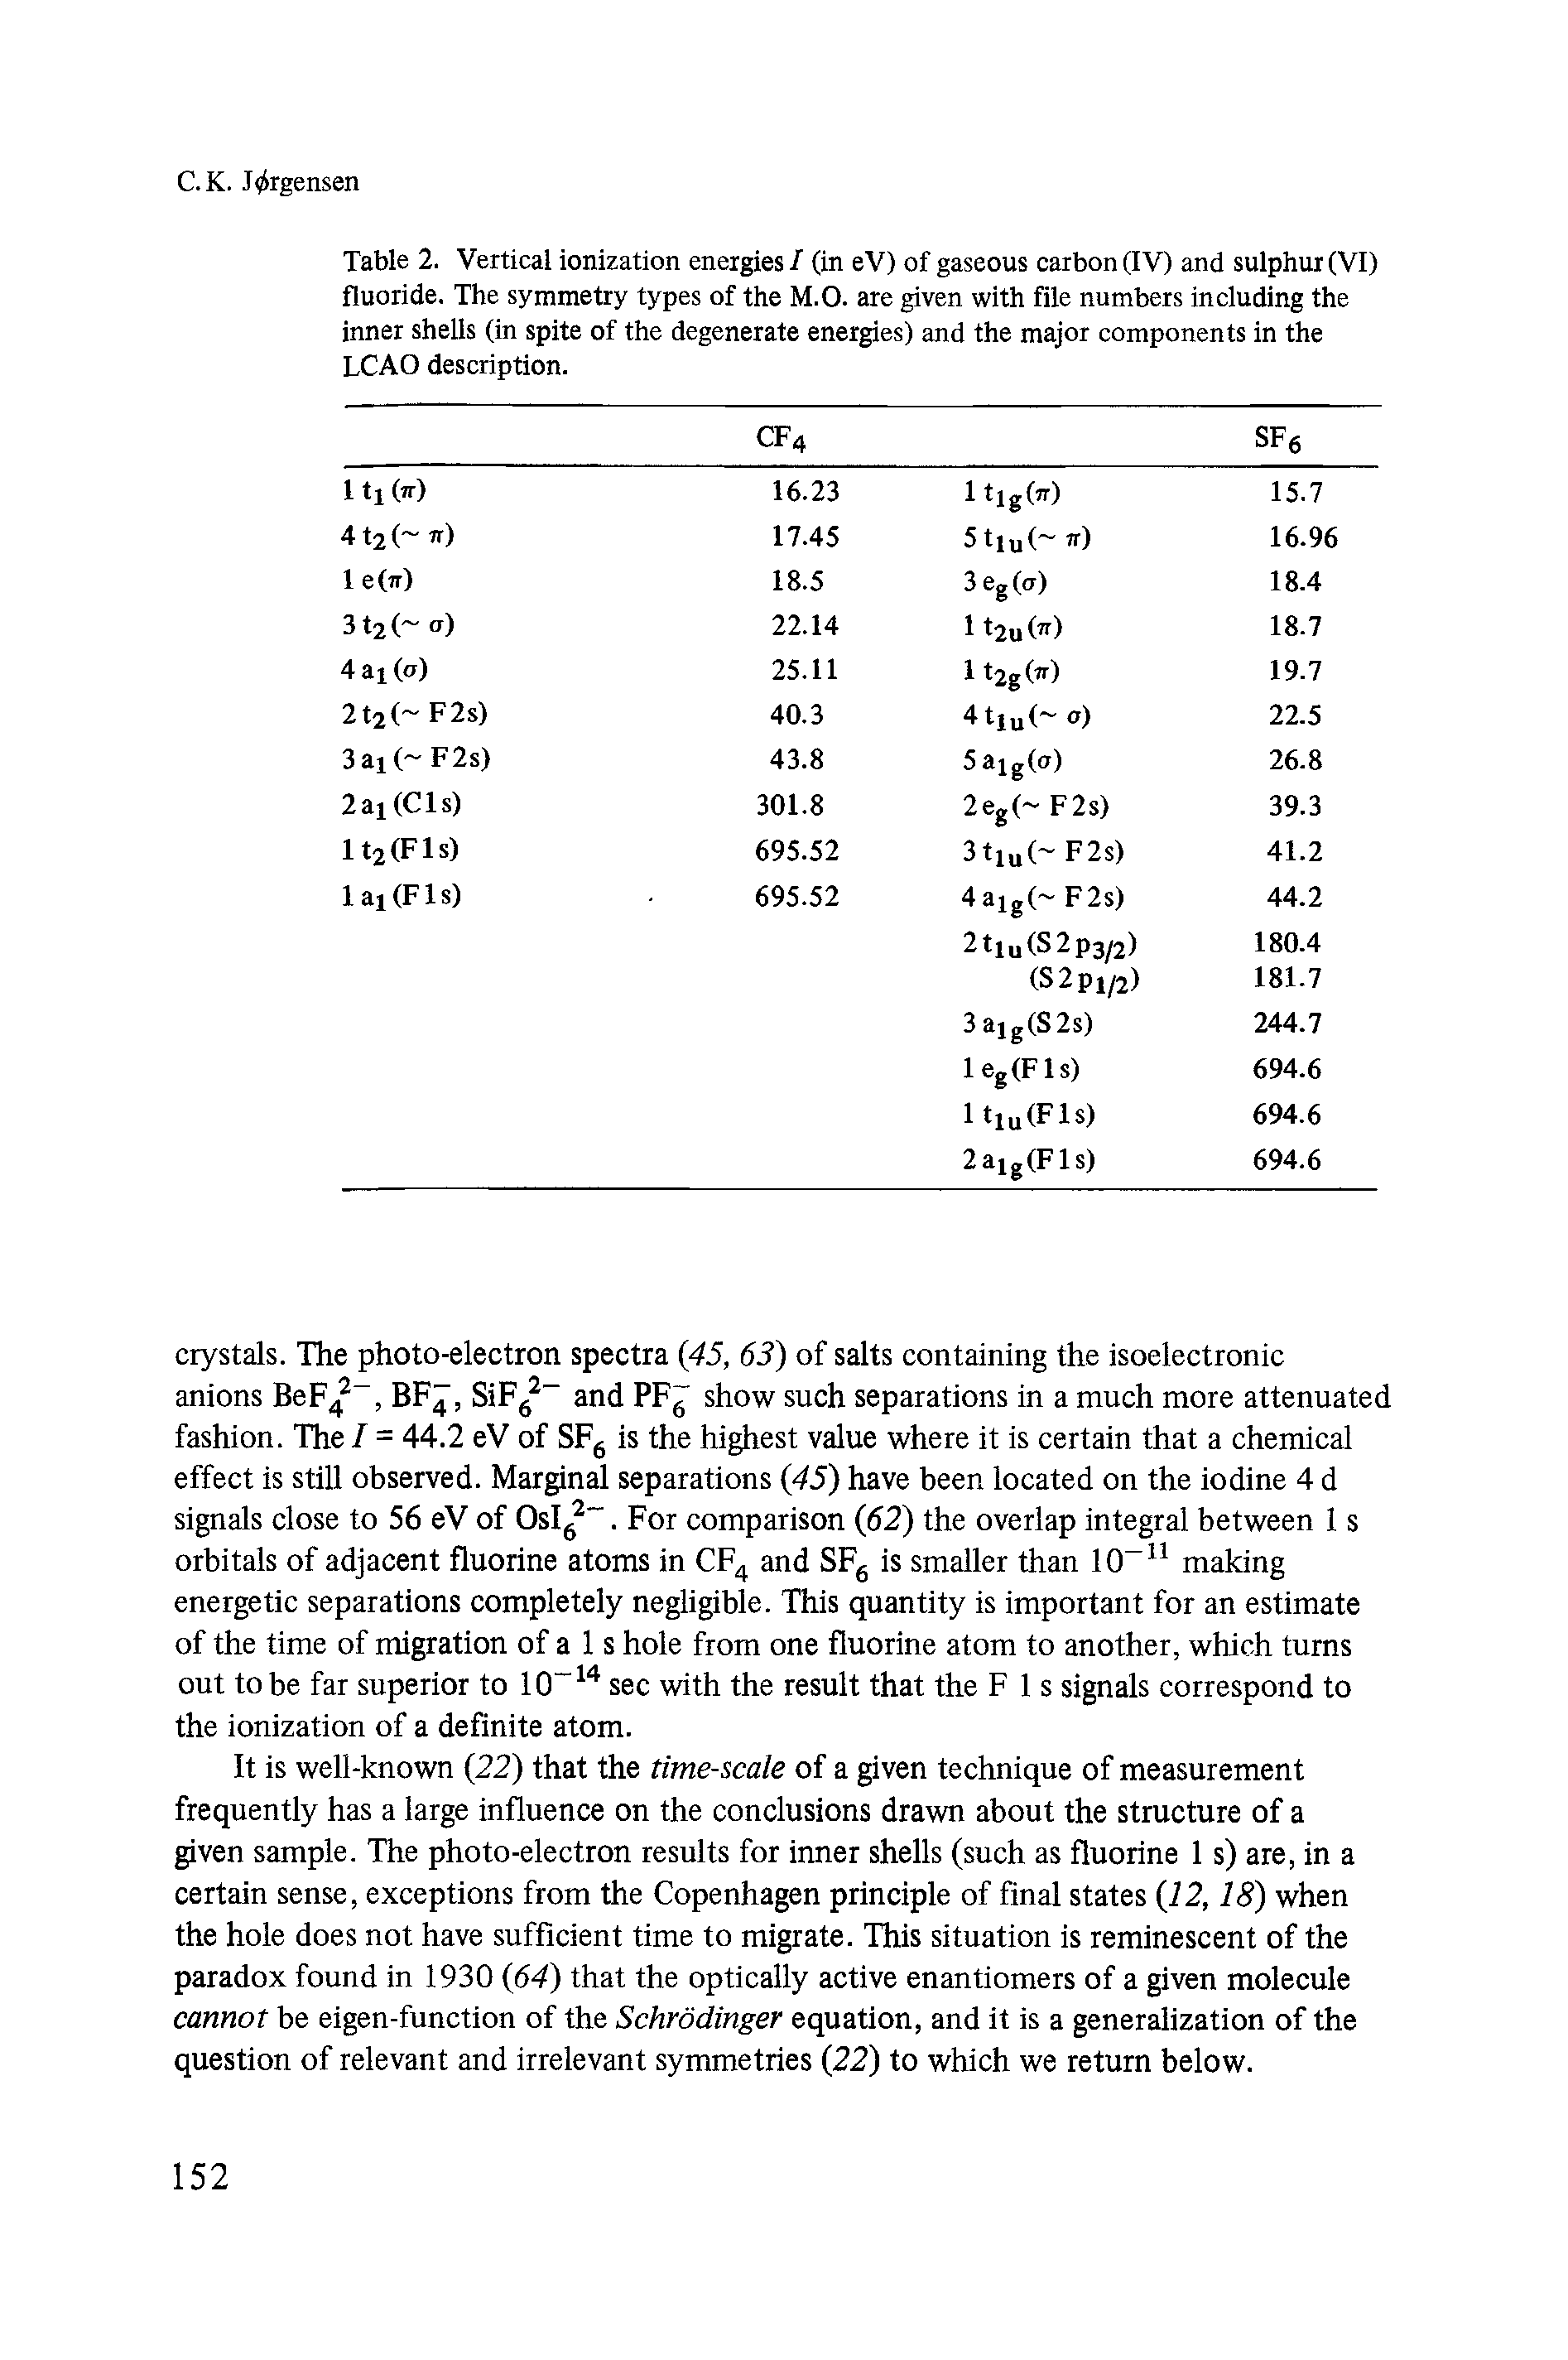 Table 2. Vertical ionization energies / (in eV) of gaseous carbon (IV) and sulphur (VI) fluoride. The symmetry types of the M.O. are given with file numbers including the inner shells (in spite of the degenerate energies) and the major components in the LCAO description.